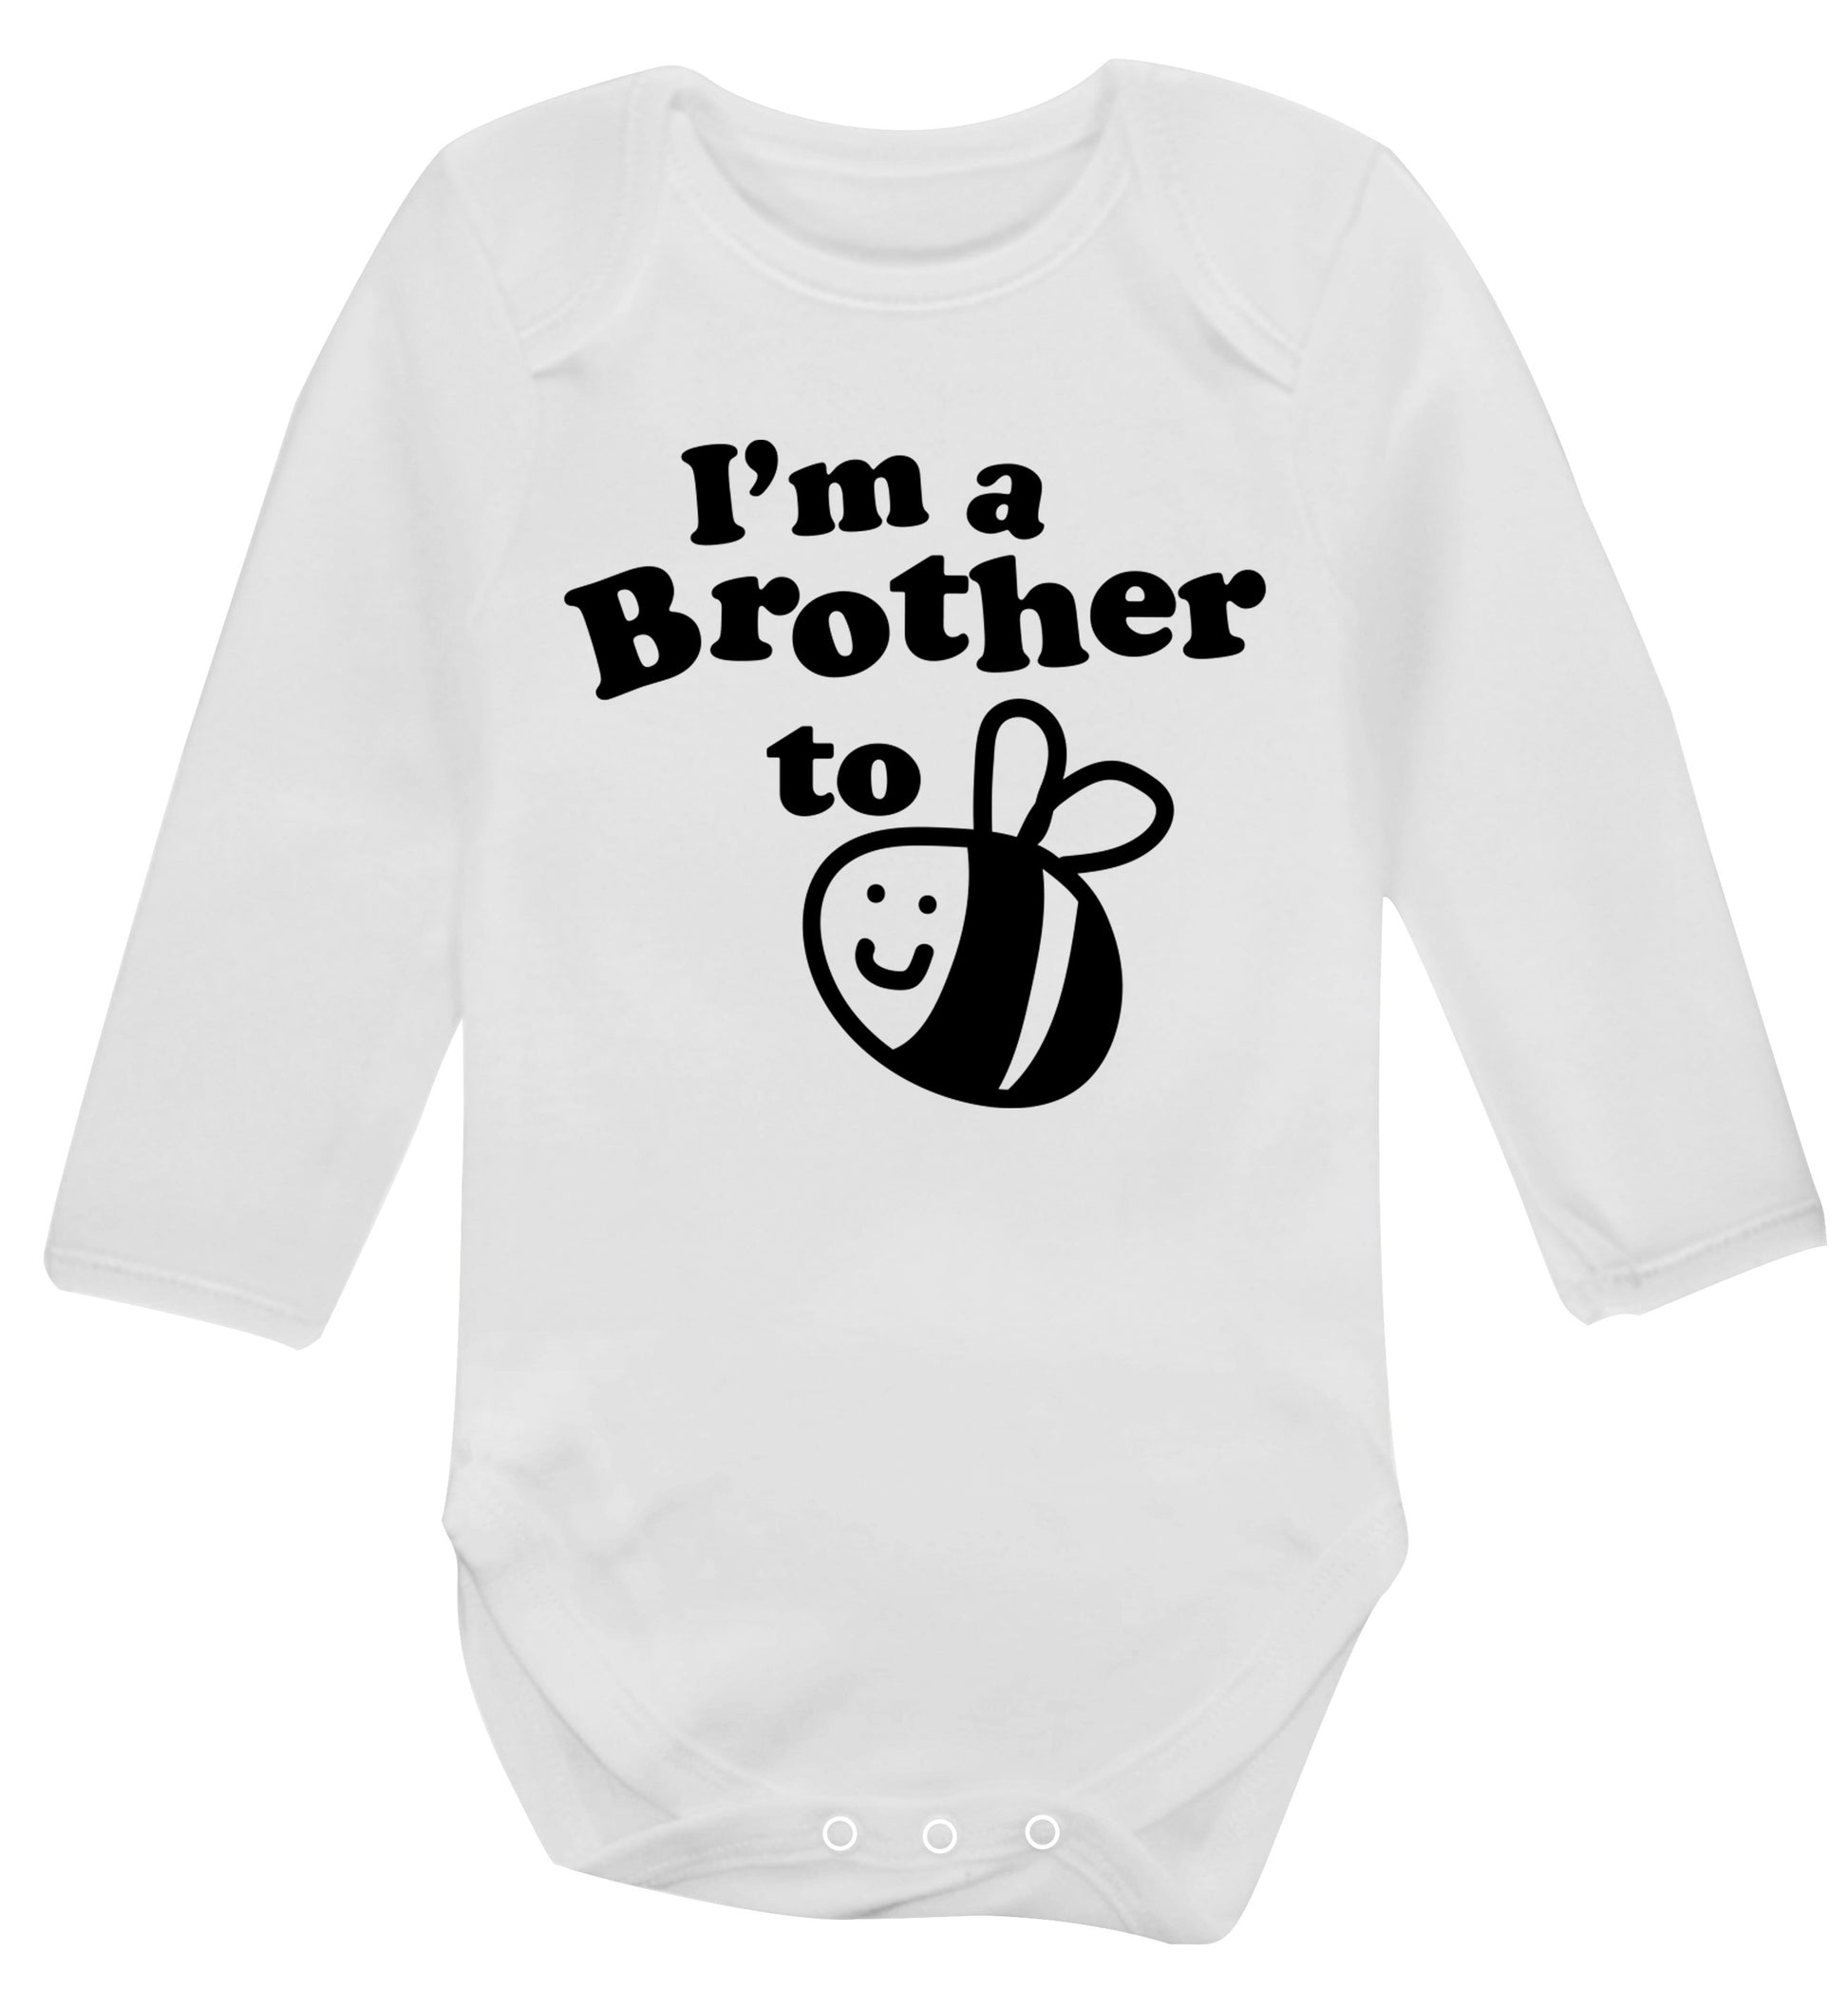 I'm a brother to be Baby Vest long sleeved white 6-12 months